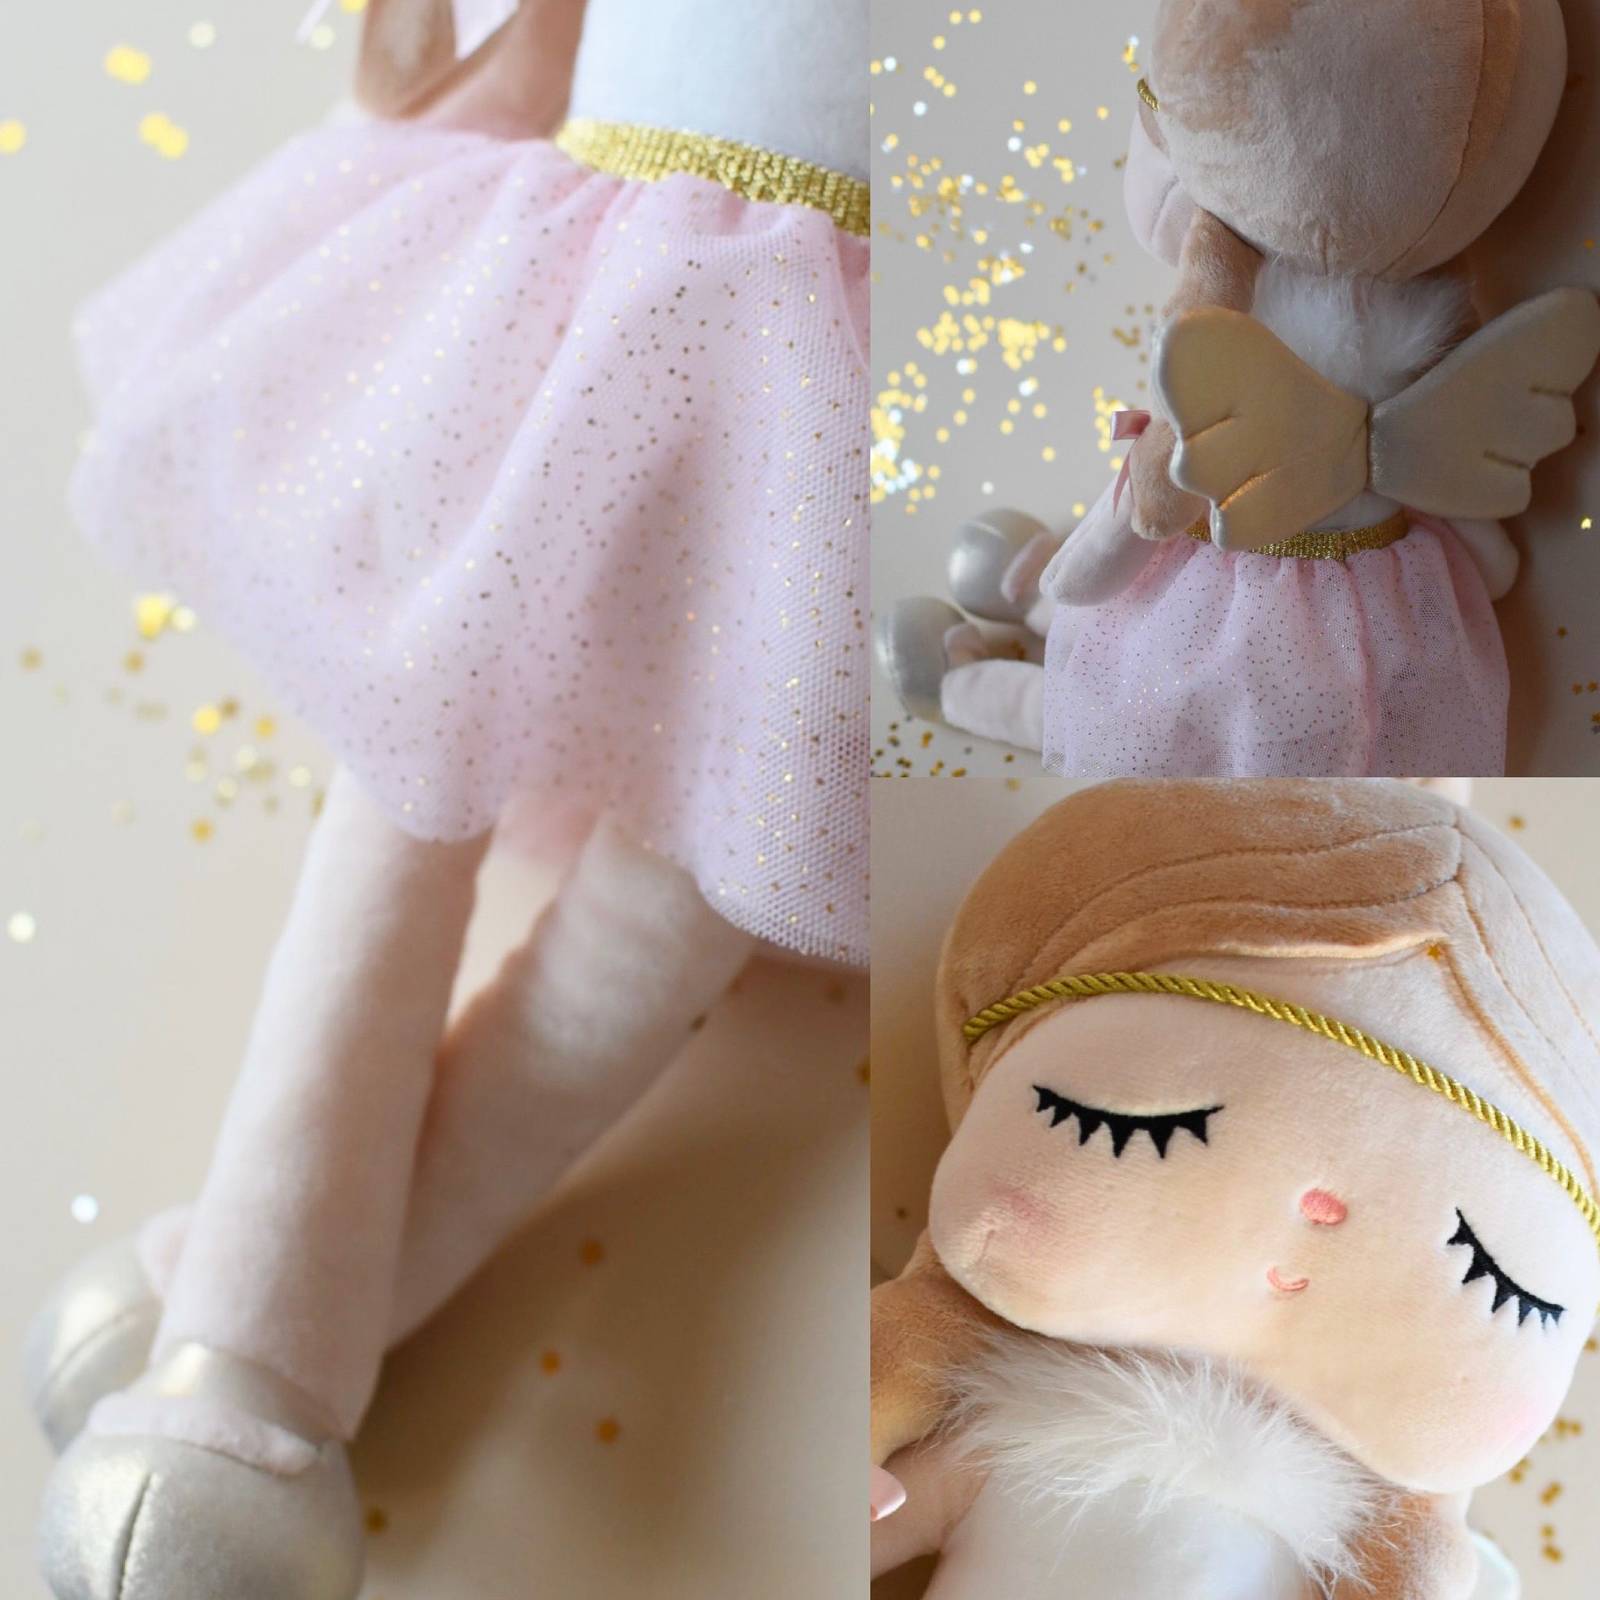 Sleeping angel, large doll with name 